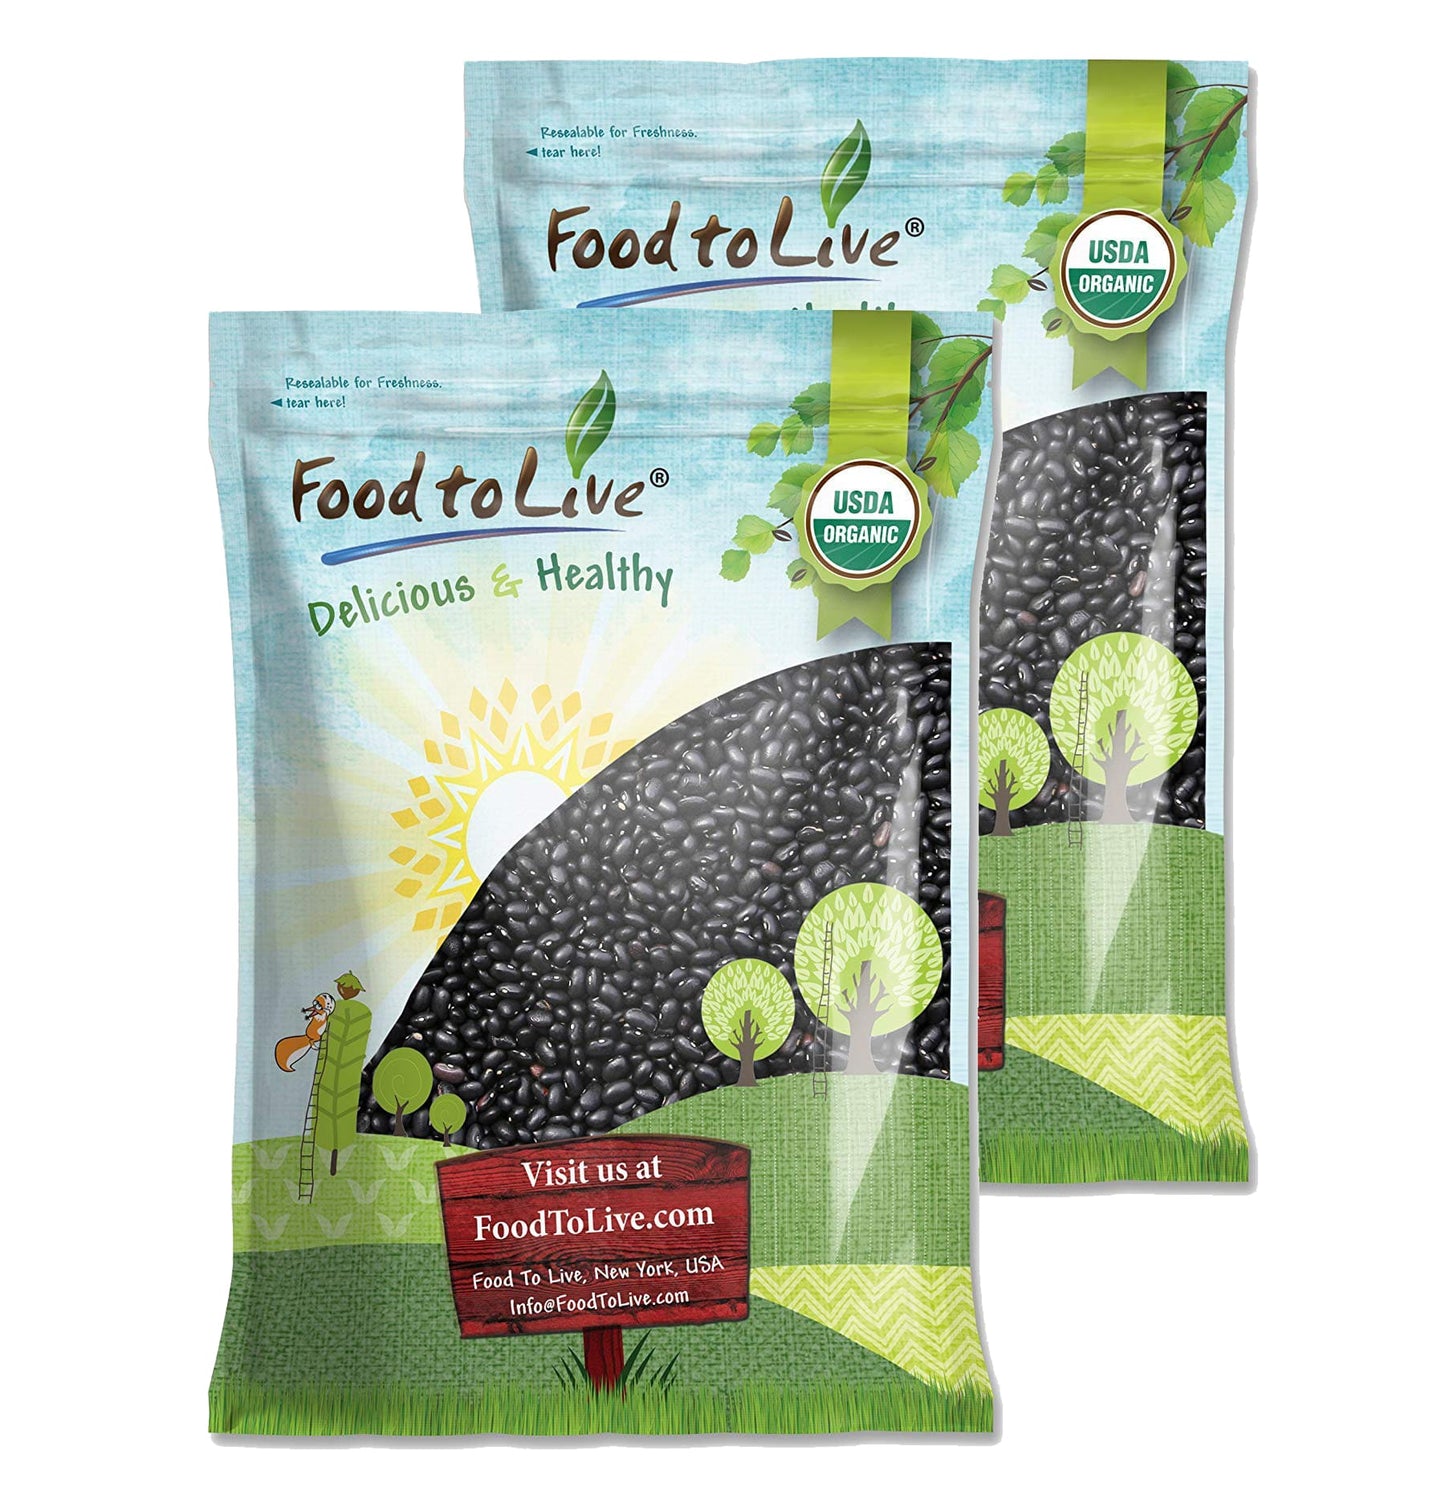 Organic Black Turtle Beans - Dried, Non-GMO, Kosher, Raw, Sproutable, Vegan, Bulk - by Food to Live